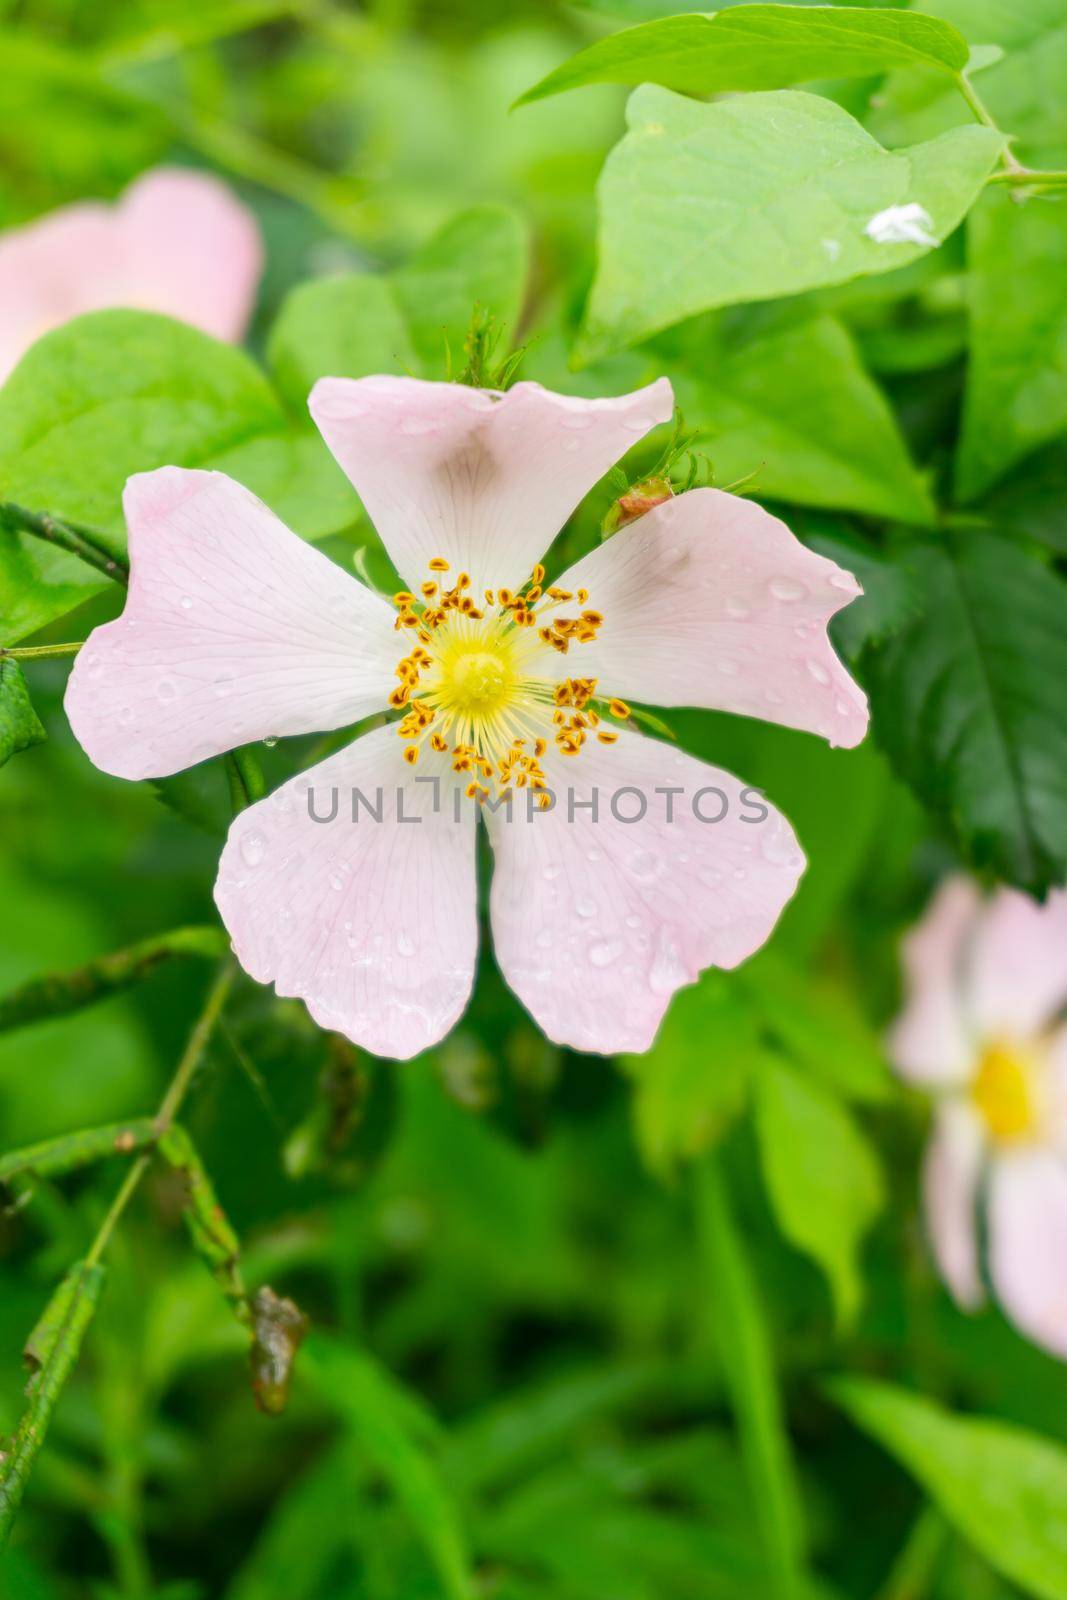 Rosa Canina or dog rose covered by drops of dew by brambillasimone